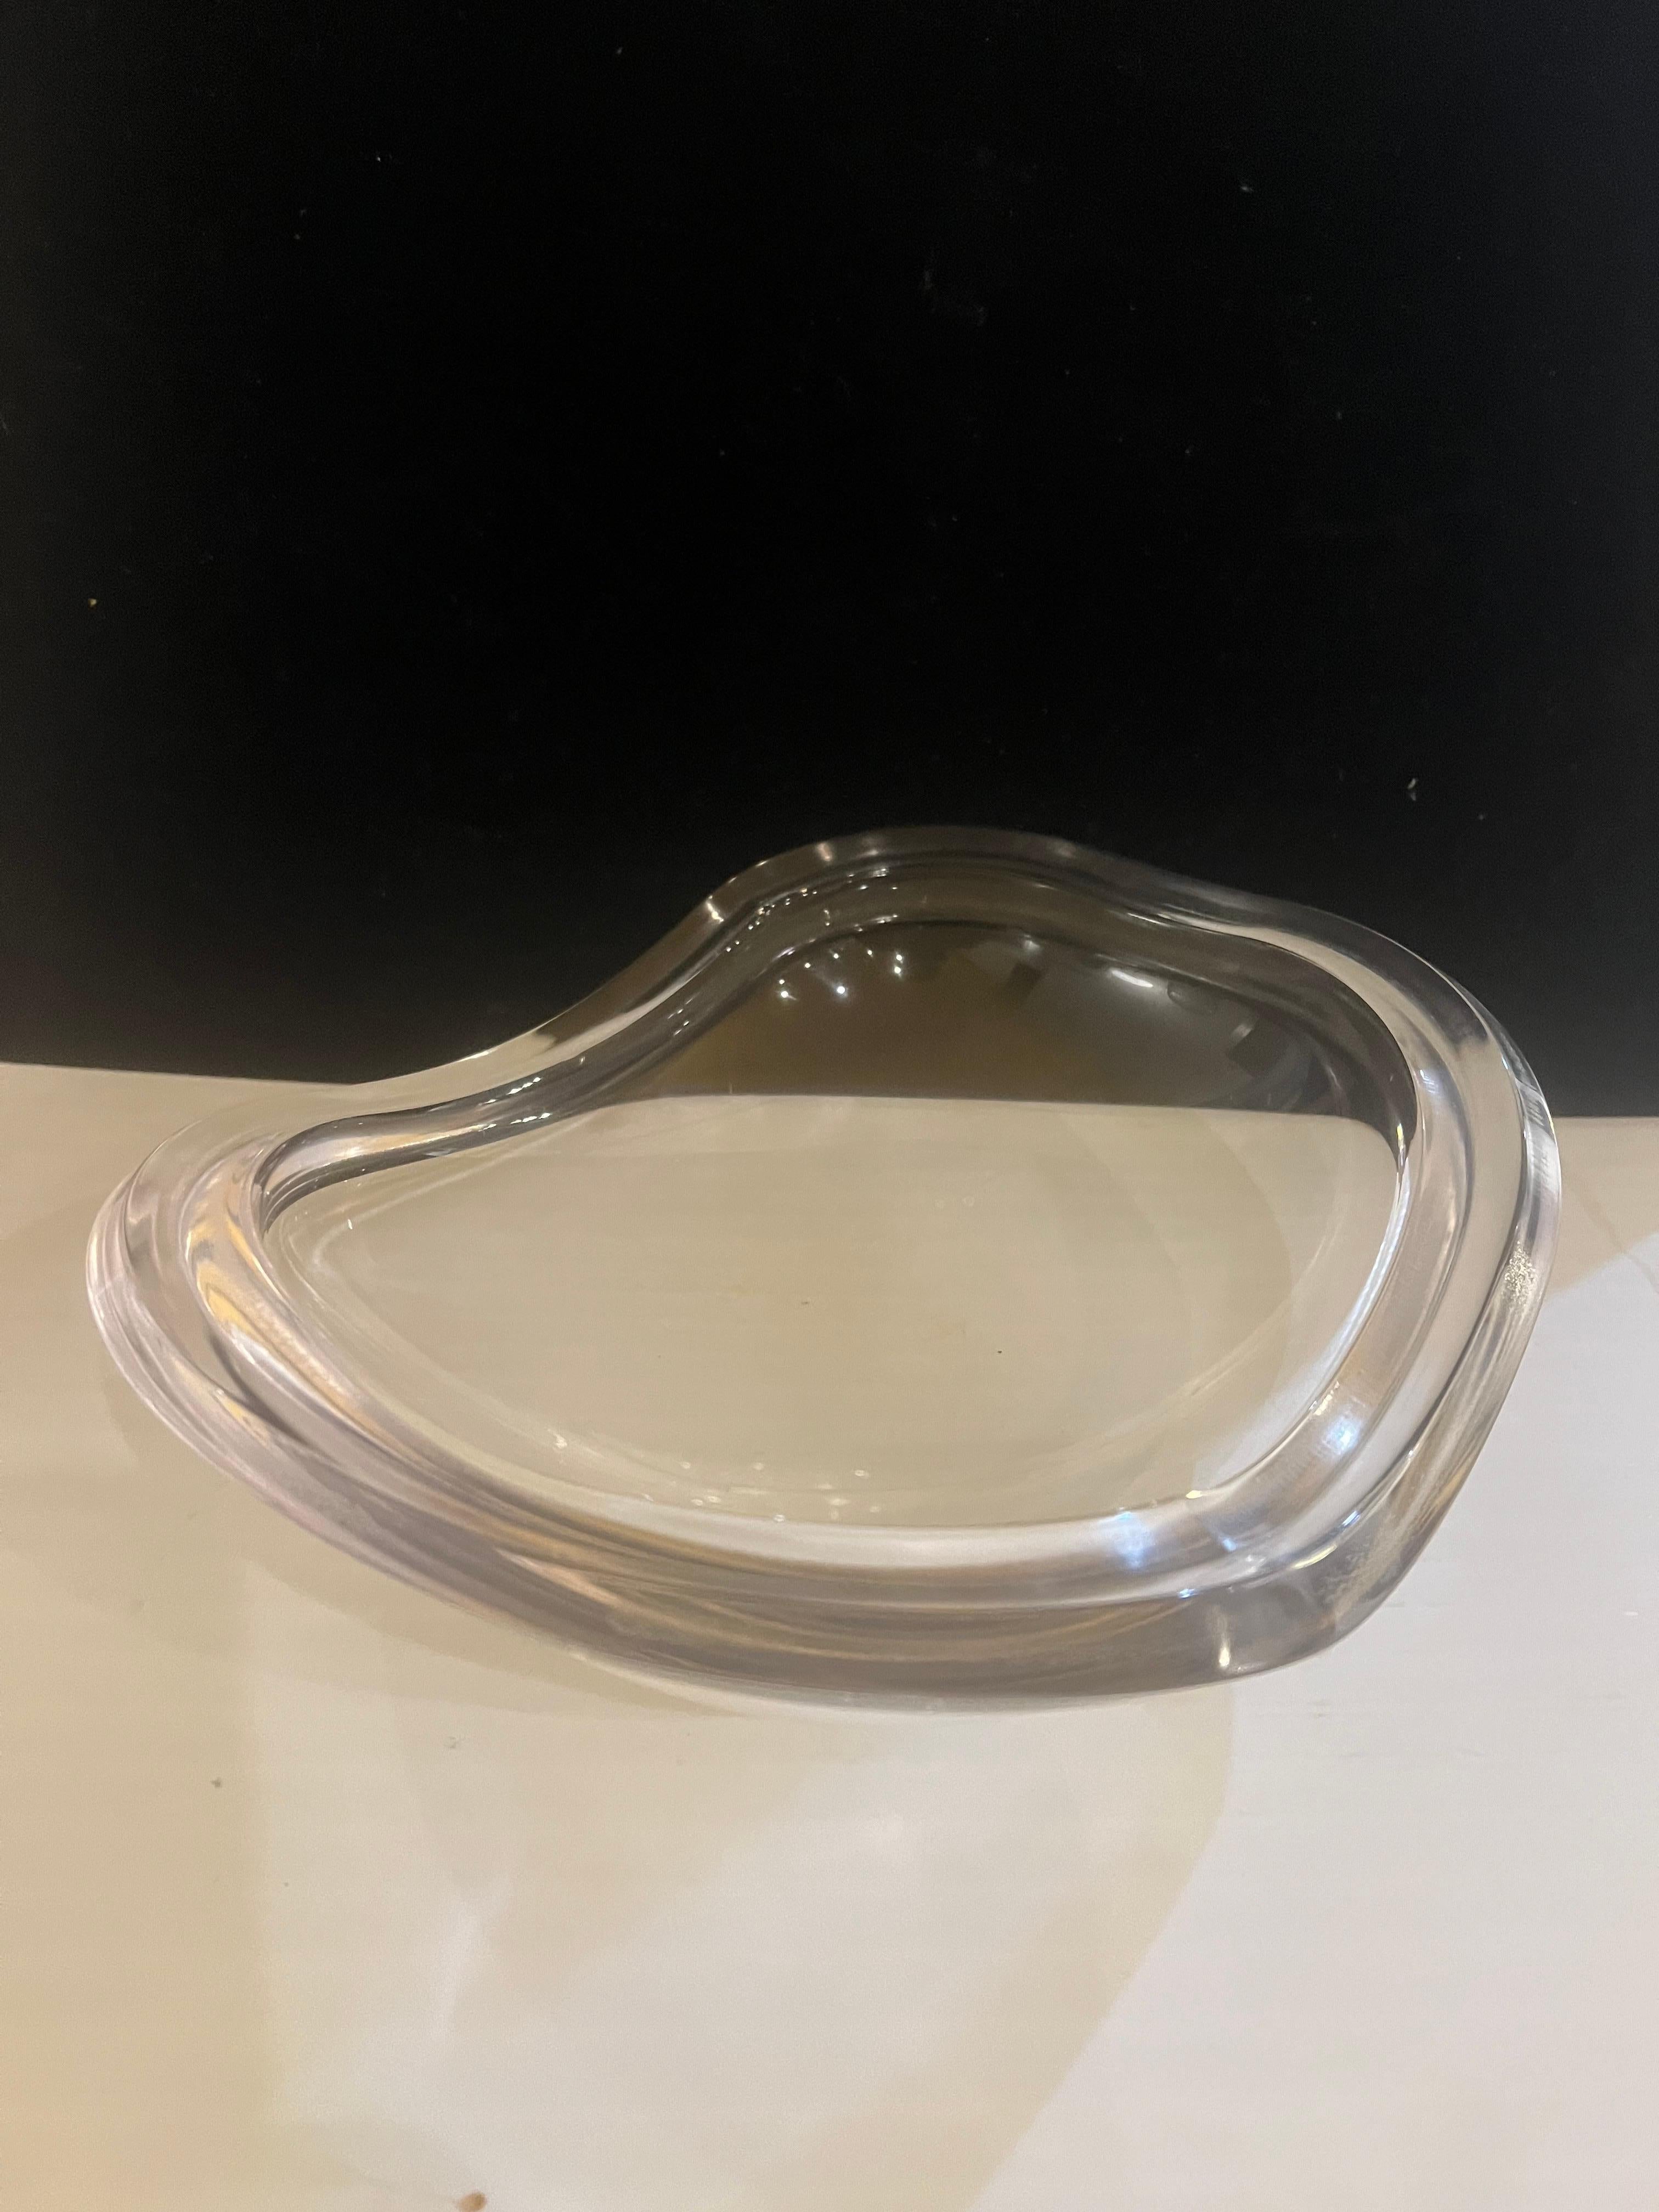 Pristine Mid-Century Biomorphic Lucite Catch-it-all Bowl Attributed To Ritts Excellent état - En vente à San Diego, CA